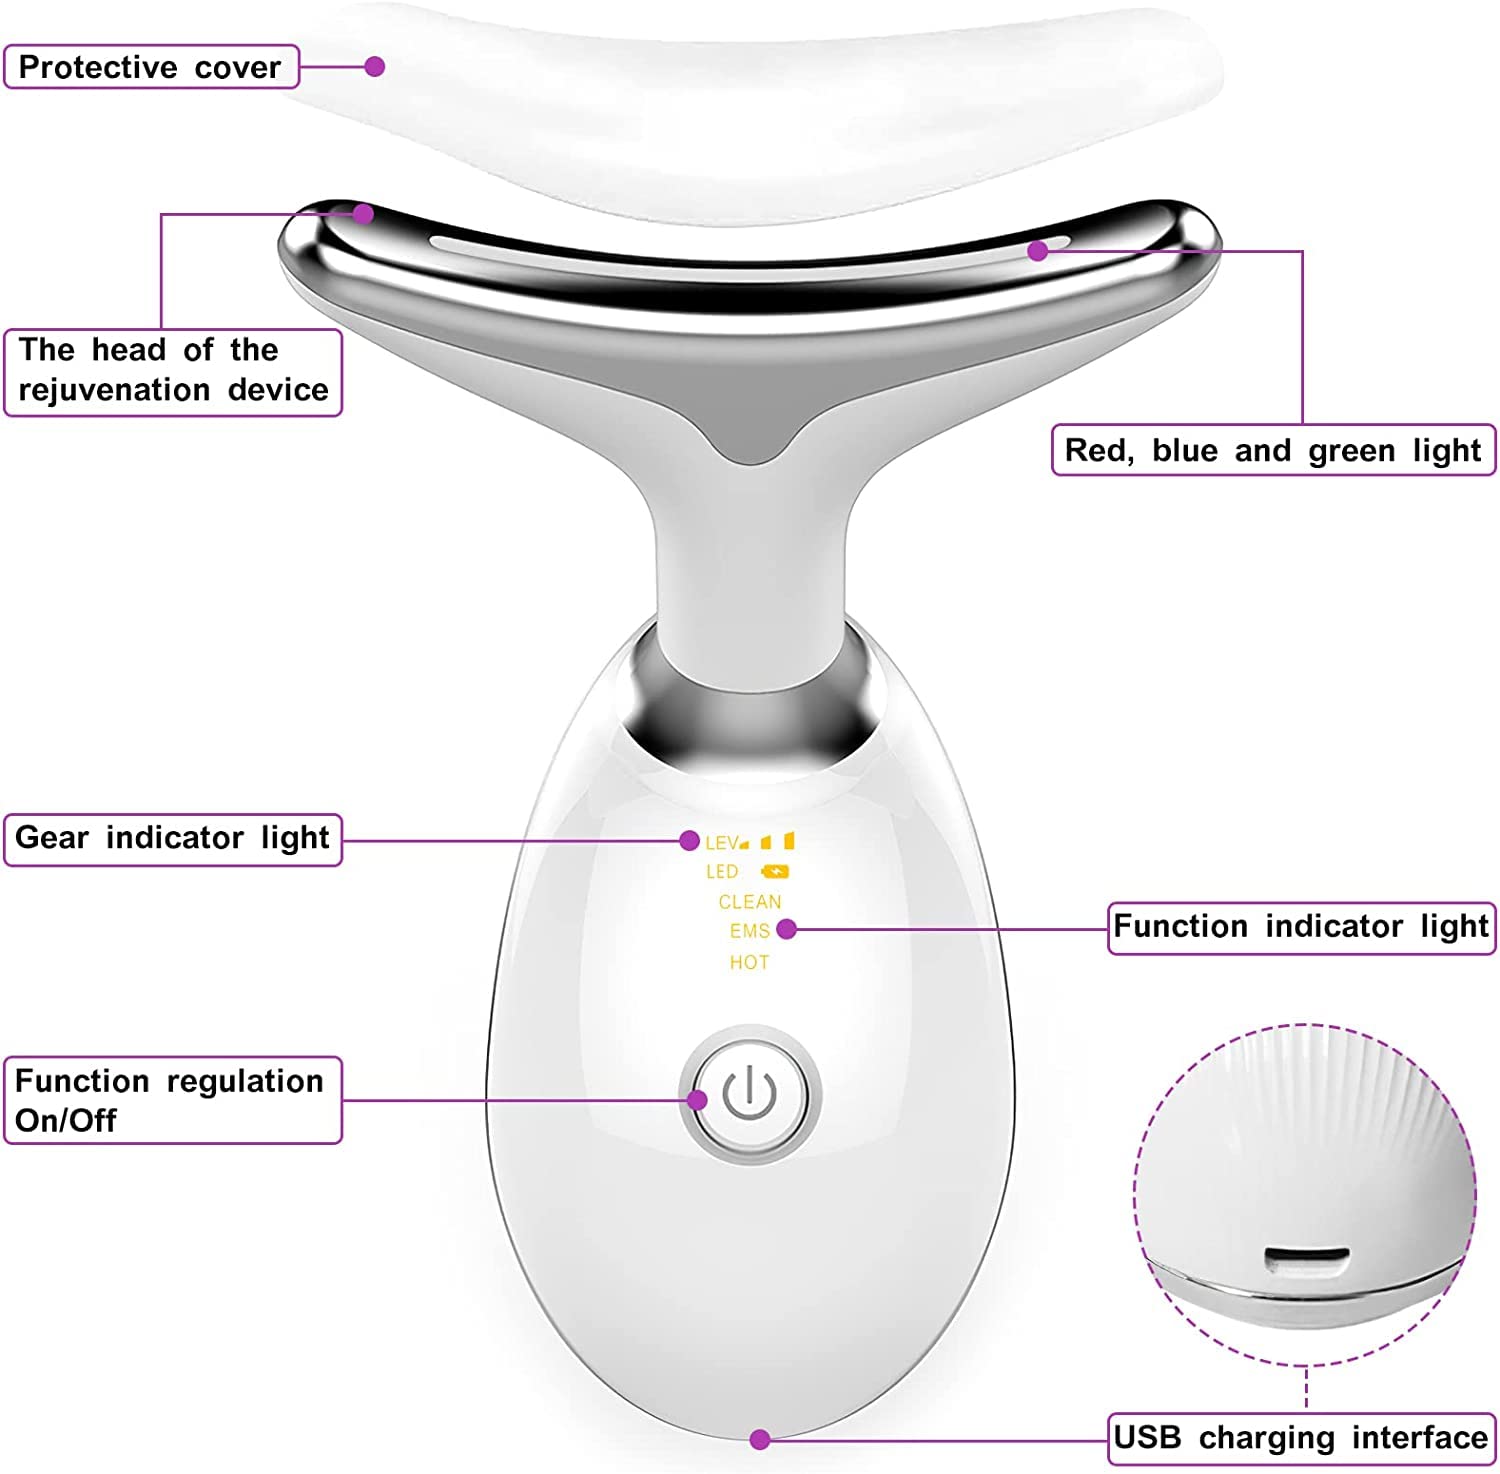 Neck Face Firming Wrinkle Removal Tool